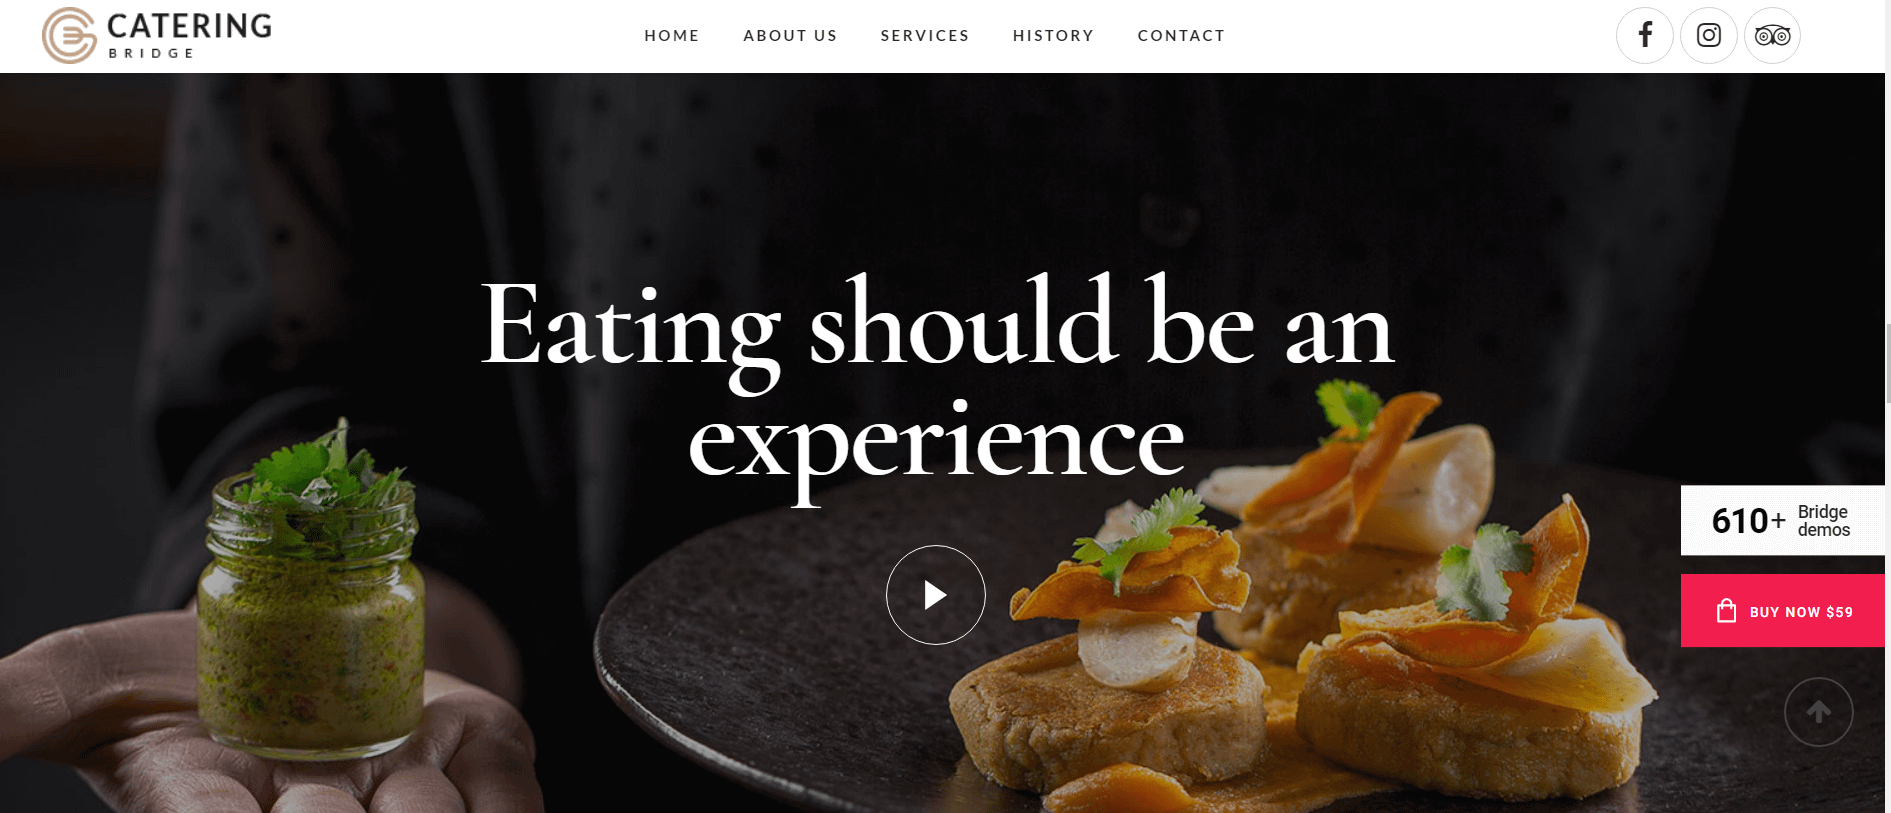 Catering landing page